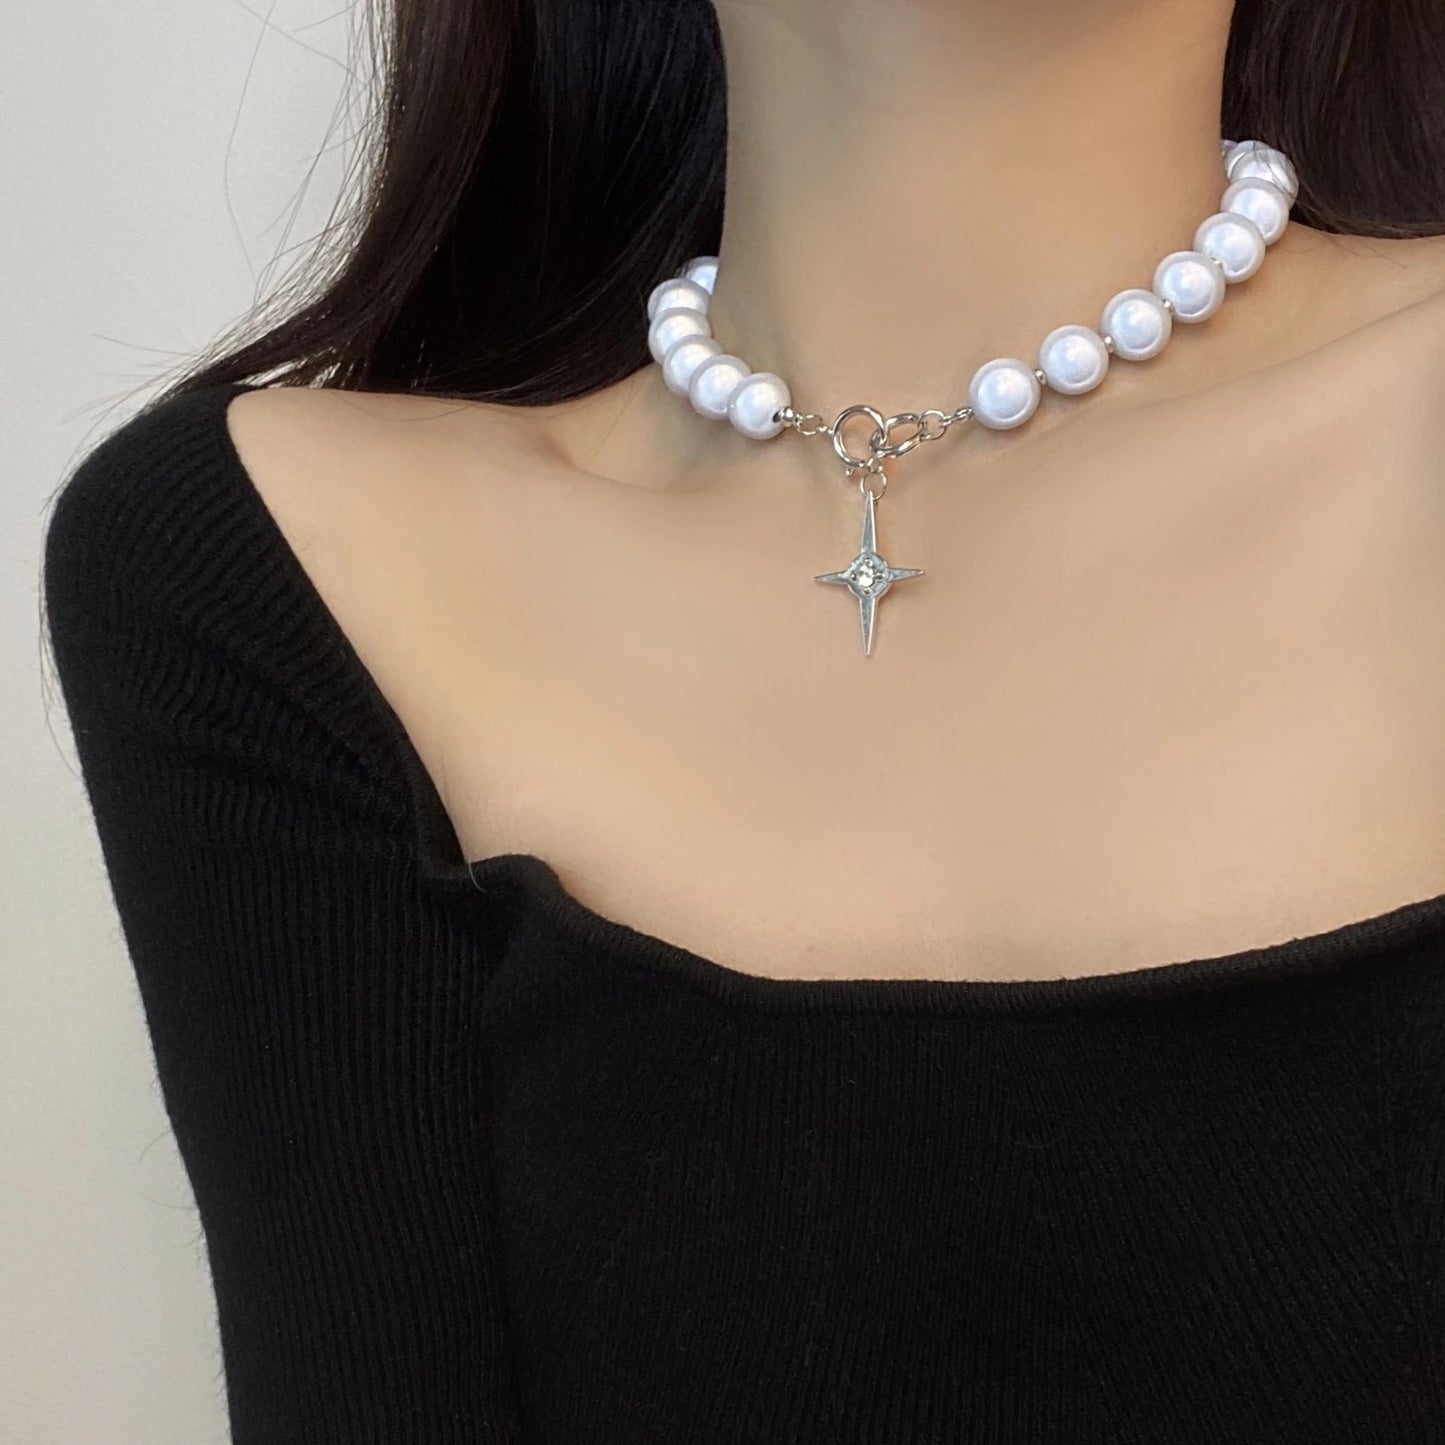 Reflective Pearl Necklace